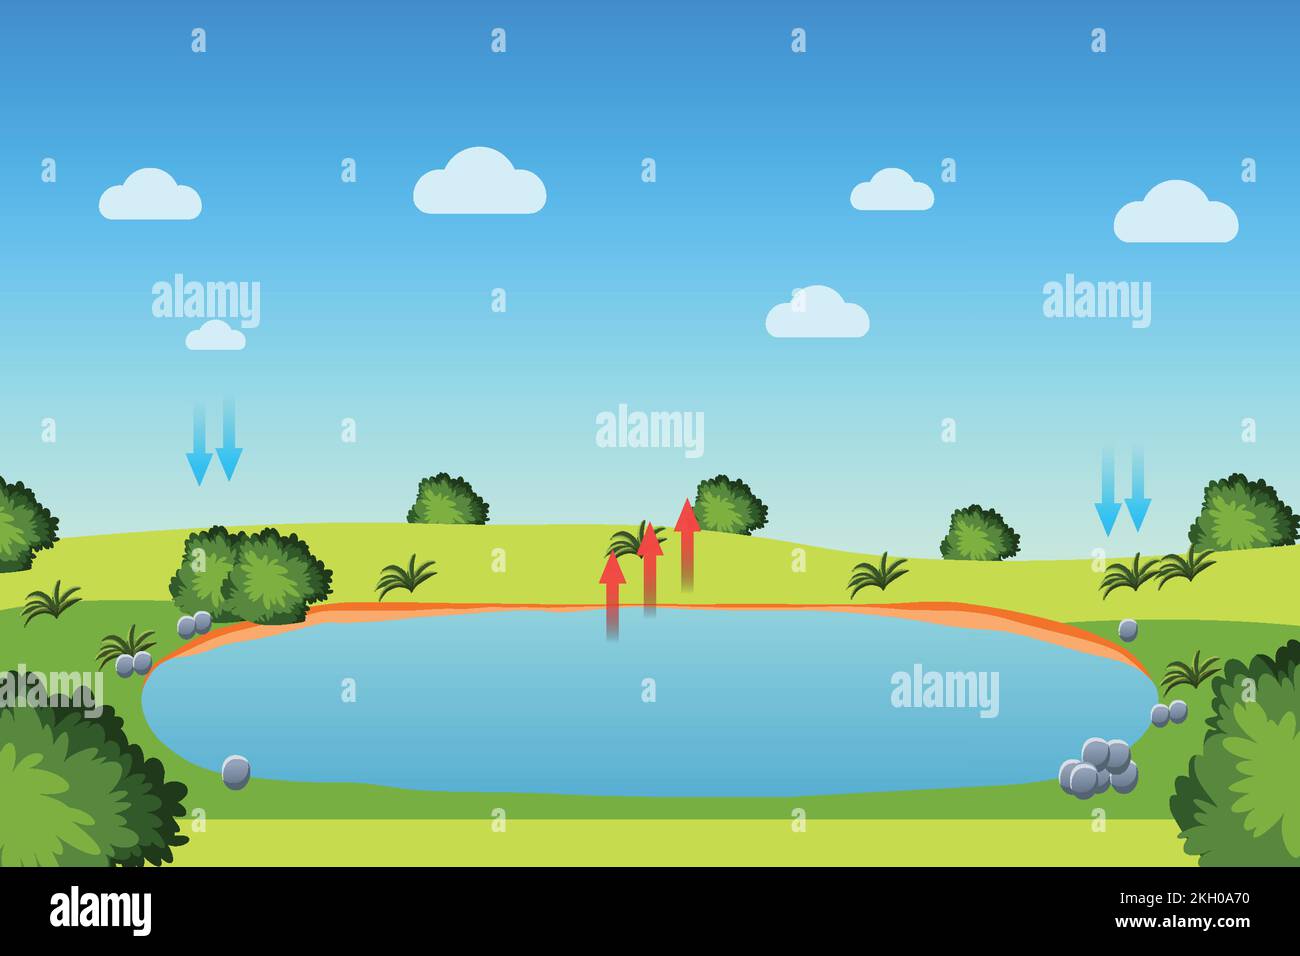 Water cycle process with a pond and blue sky. Evaporation, condensation, and precipitation process infographic diagram for the study. Green field with Stock Vector